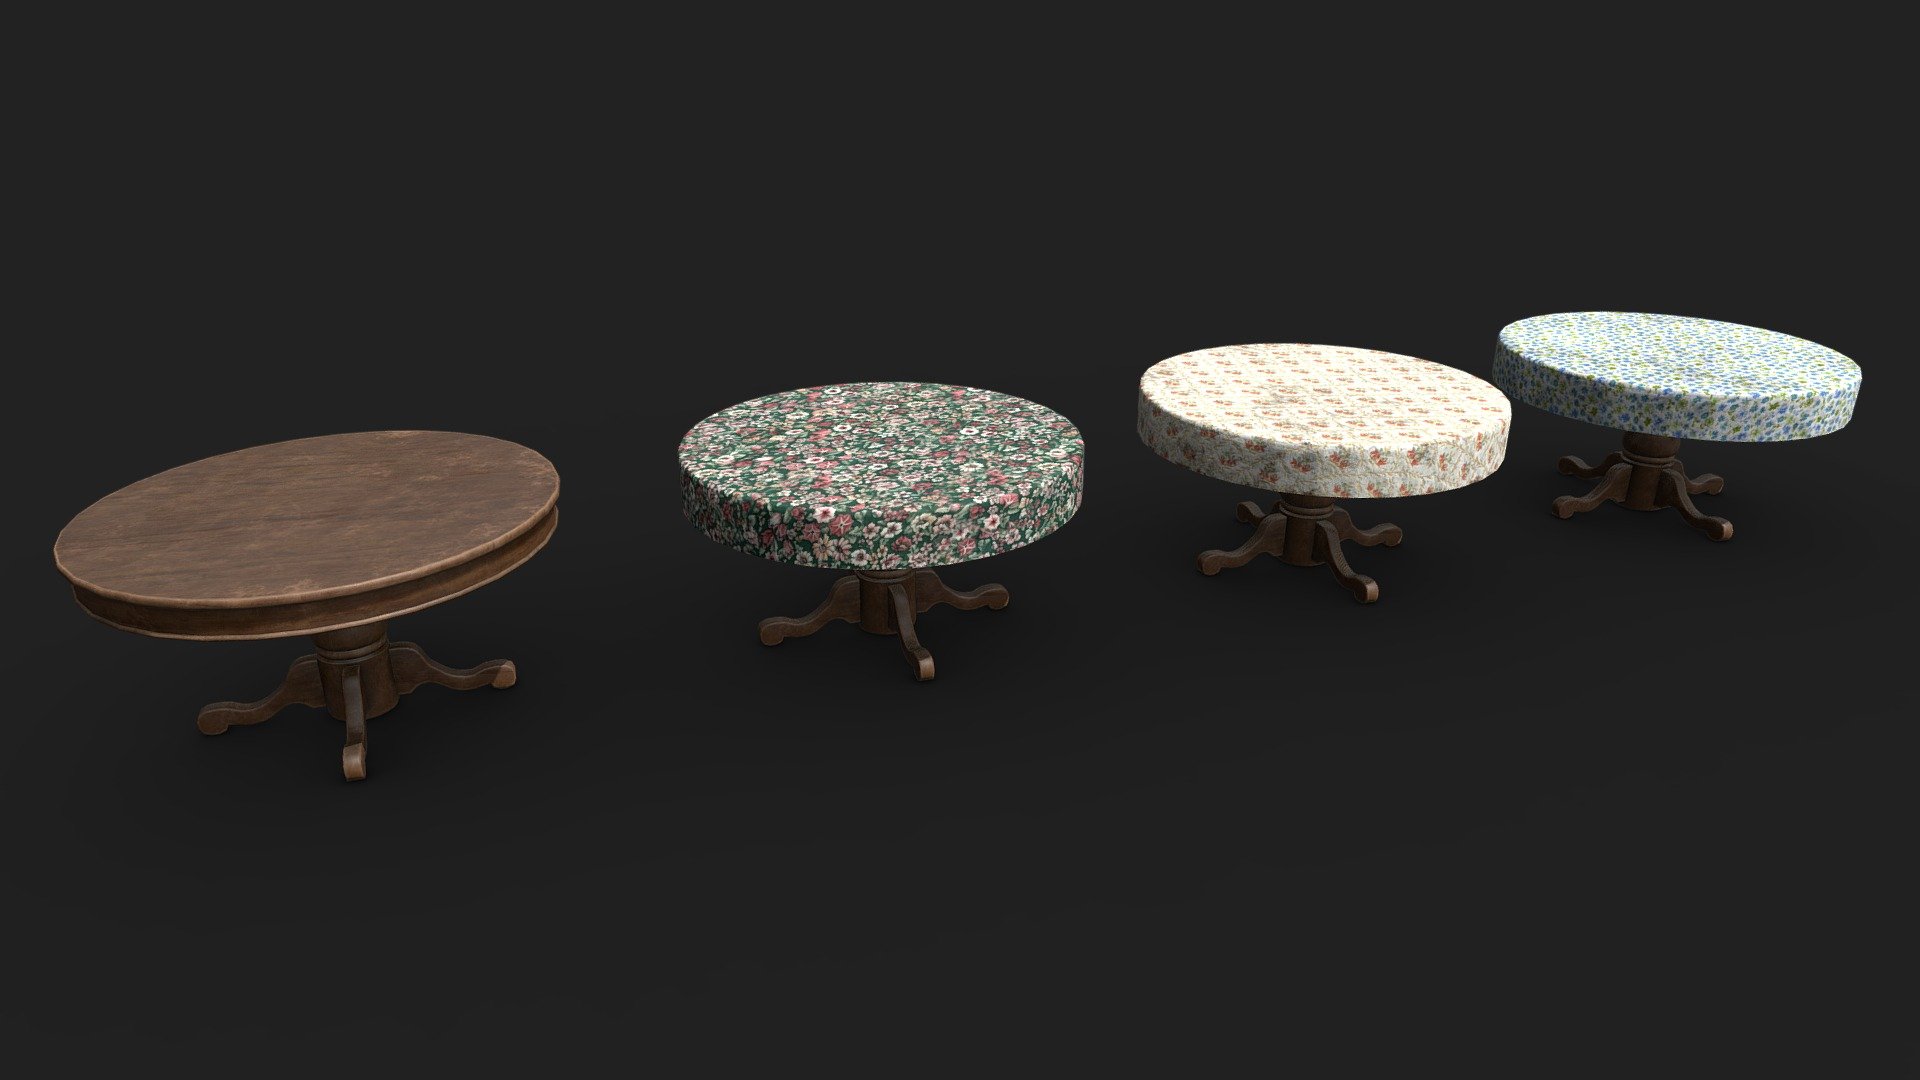 A round wooden table with 3 different materials of table cloth.

4x 2048x2048 textures packs (PBR Metal Rough, Unity HDRP, Unity Standard Metallic and UE4):

PBR Metal Rough- BaseColor, AO, Height, Normal, Roughness and Metallic;

Unity HDRP: BaseColor, MaskMap, Normal;

Unity Standard Metallic: AlbedoTransparency, MetallicSmoothness, Normal;

Unreal Engine 4: BaseColor, Normal, OcclusionRoughnessMetallic;

The package also has the .fbx, .obj, .stl, .dae and .blend file 3d model